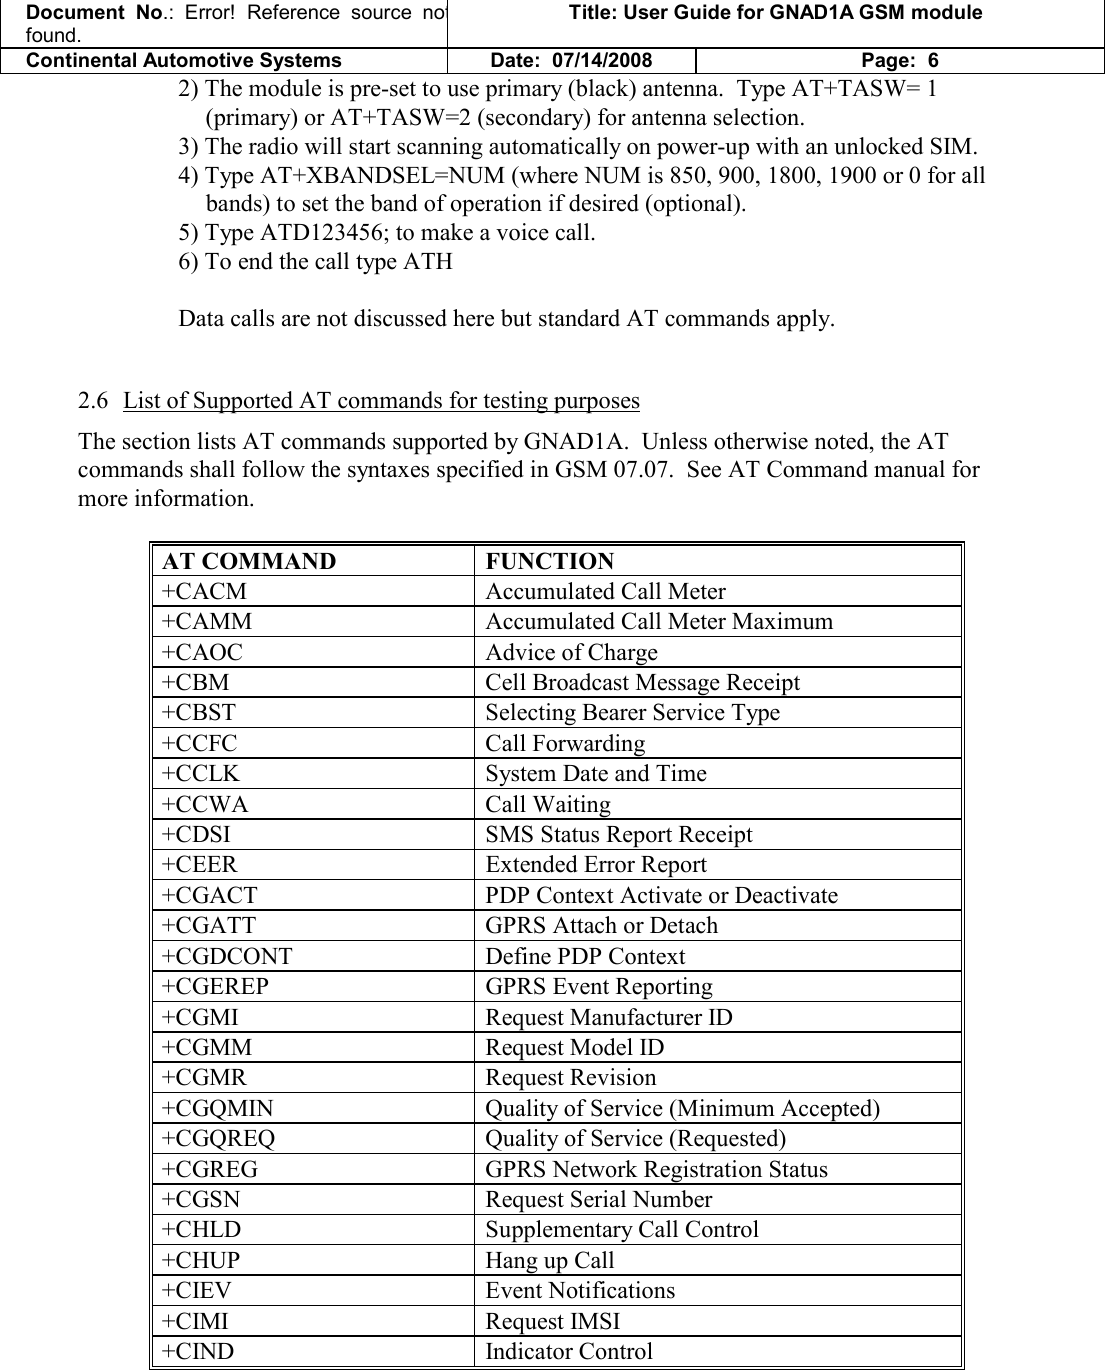 Document  No.: Error!  Reference  source  not found. Title: User Guide for GNAD1A GSM module Continental Automotive Systems Date:  07/14/2008 Page:  6 2) The module is pre-set to use primary (black) antenna.  Type AT+TASW= 1 (primary) or AT+TASW=2 (secondary) for antenna selection. 3) The radio will start scanning automatically on power-up with an unlocked SIM. 4) Type AT+XBANDSEL=NUM (where NUM is 850, 900, 1800, 1900 or 0 for all bands) to set the band of operation if desired (optional). 5) Type ATD123456; to make a voice call. 6) To end the call type ATH  Data calls are not discussed here but standard AT commands apply.  2.6 List of Supported AT commands for testing purposes The section lists AT commands supported by GNAD1A.  Unless otherwise noted, the AT commands shall follow the syntaxes specified in GSM 07.07.  See AT Command manual for more information.  AT COMMAND   FUNCTION +CACM   Accumulated Call Meter  +CAMM   Accumulated Call Meter Maximum  +CAOC   Advice of Charge  +CBM   Cell Broadcast Message Receipt  +CBST   Selecting Bearer Service Type  +CCFC   Call Forwarding  +CCLK   System Date and Time  +CCWA   Call Waiting  +CDSI   SMS Status Report Receipt  +CEER   Extended Error Report  +CGACT   PDP Context Activate or Deactivate  +CGATT   GPRS Attach or Detach  +CGDCONT   Define PDP Context +CGEREP   GPRS Event Reporting  +CGMI   Request Manufacturer ID  +CGMM   Request Model ID  +CGMR   Request Revision  +CGQMIN   Quality of Service (Minimum Accepted)  +CGQREQ   Quality of Service (Requested)  +CGREG   GPRS Network Registration Status  +CGSN   Request Serial Number  +CHLD   Supplementary Call Control  +CHUP   Hang up Call  +CIEV   Event Notifications  +CIMI   Request IMSI  +CIND   Indicator Control  